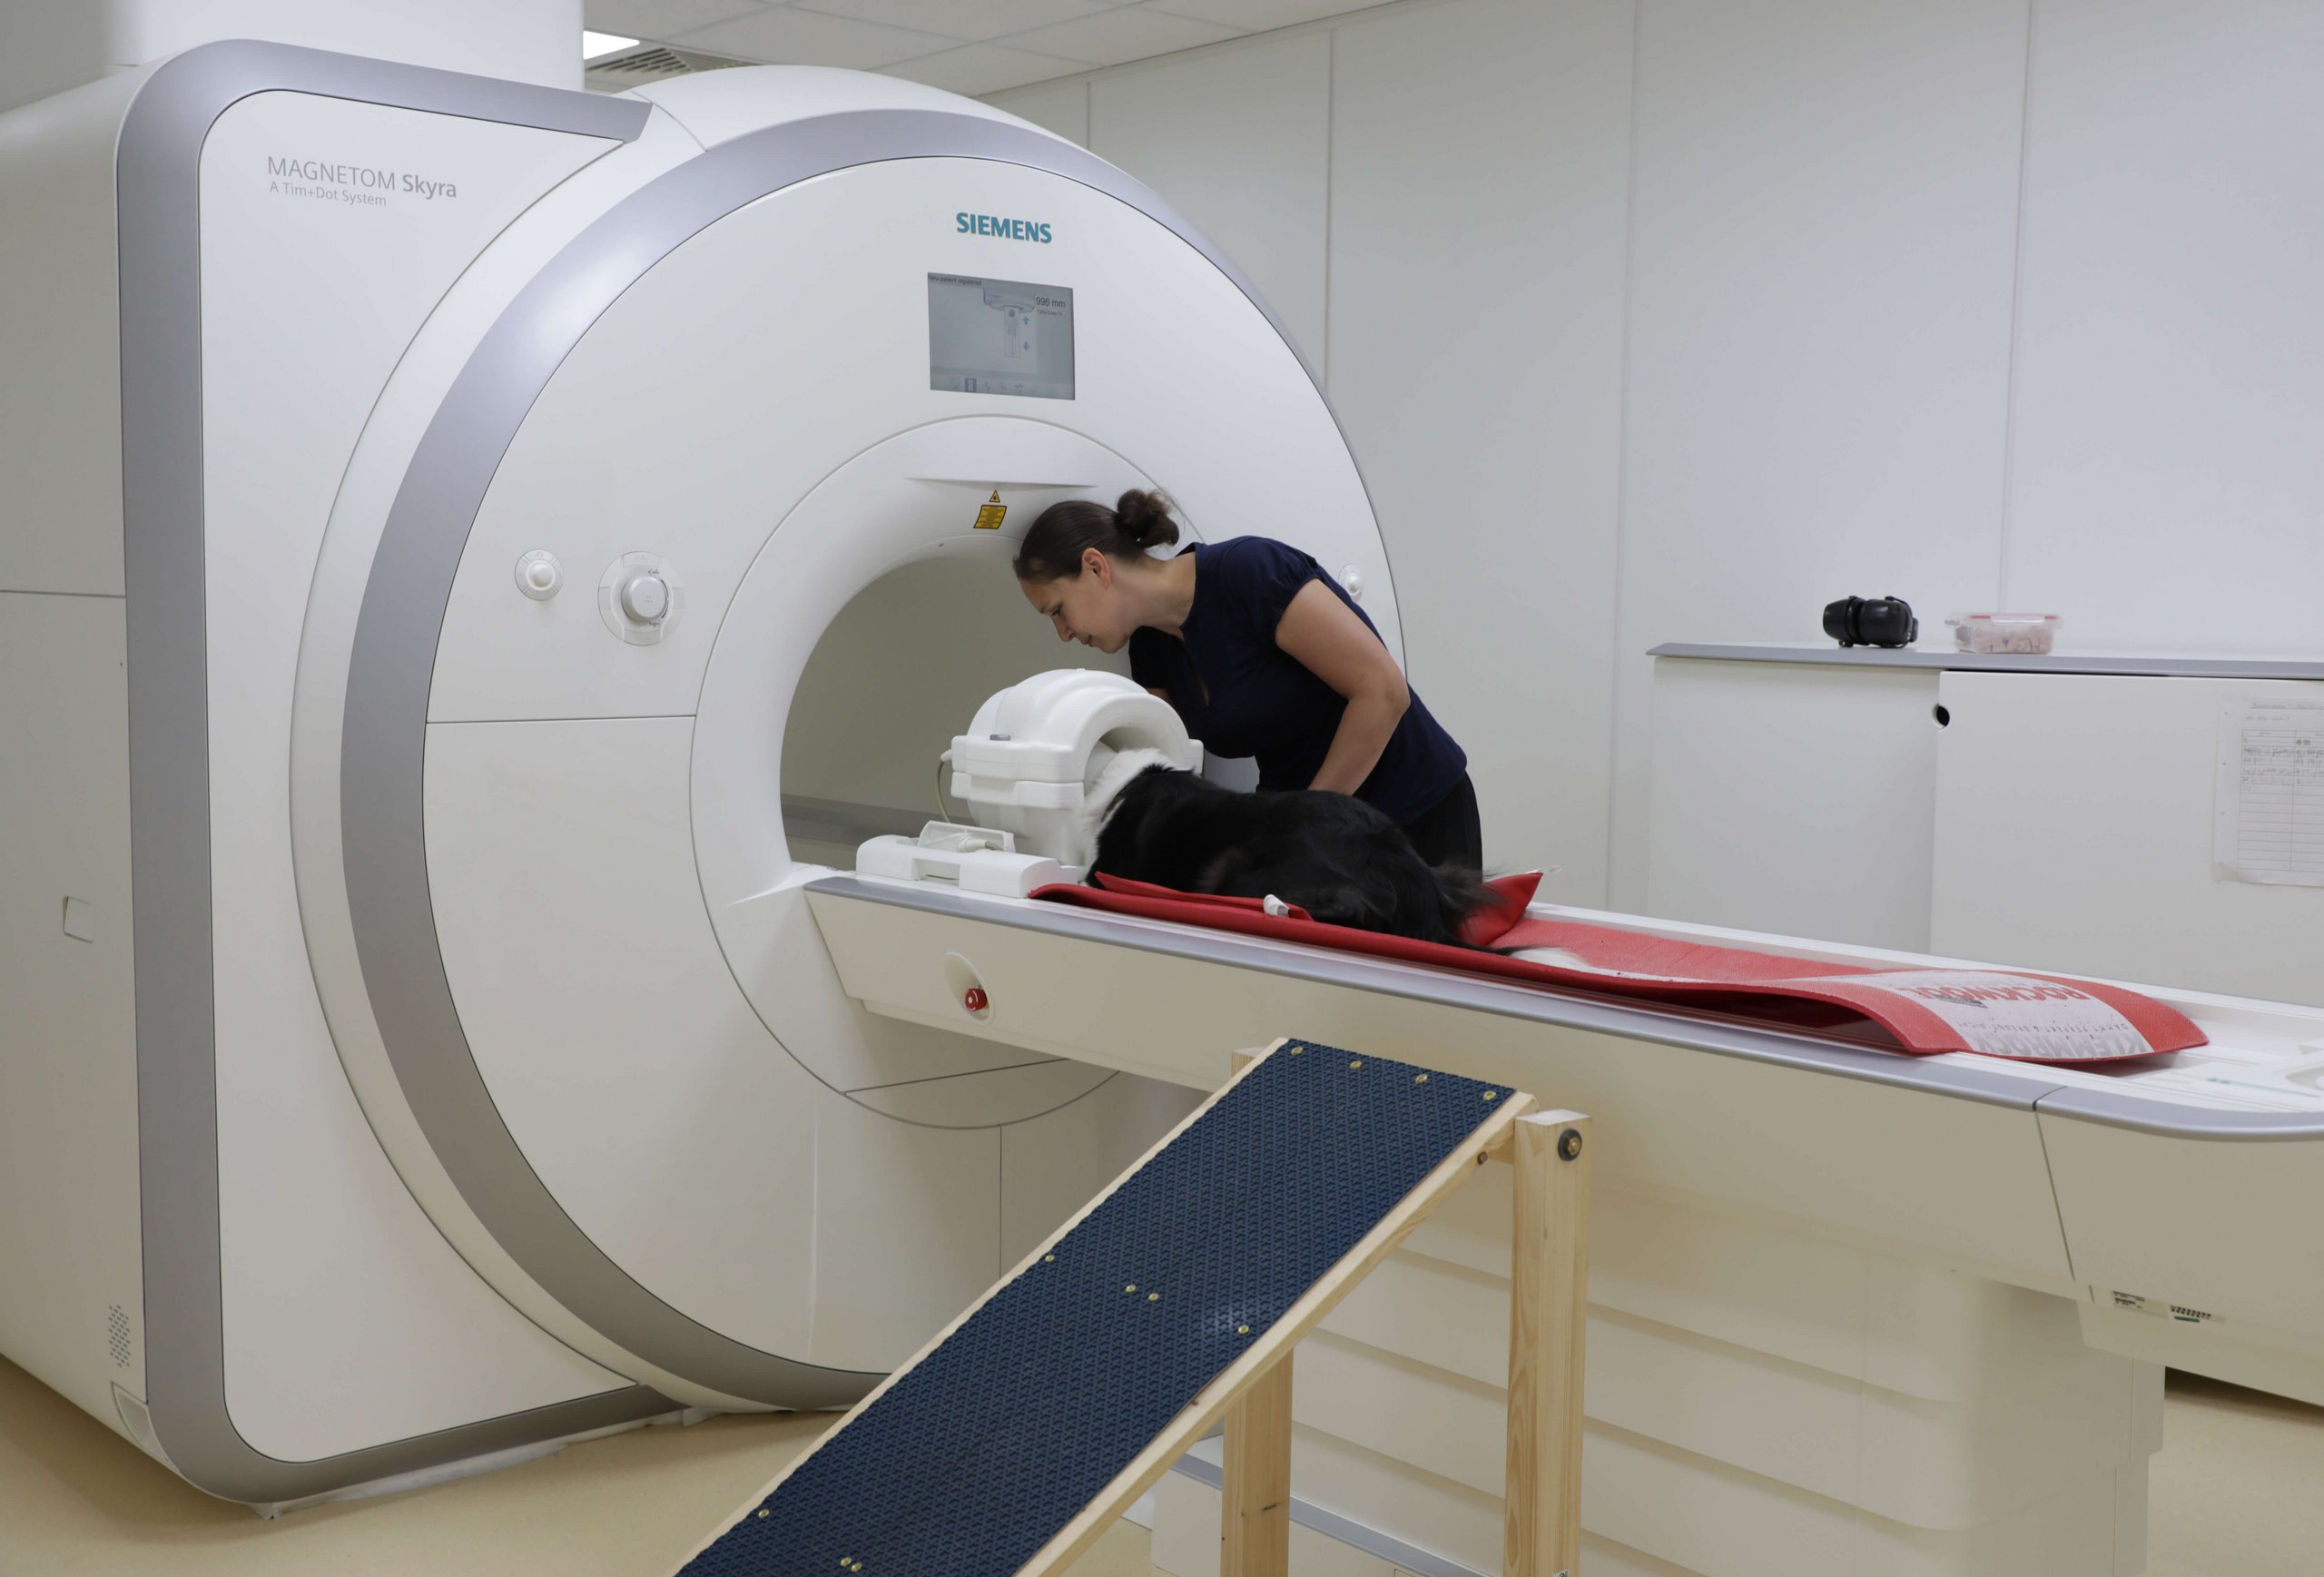 A dog lies on the table of an MRI scanner, the dog trainer stands next to it.